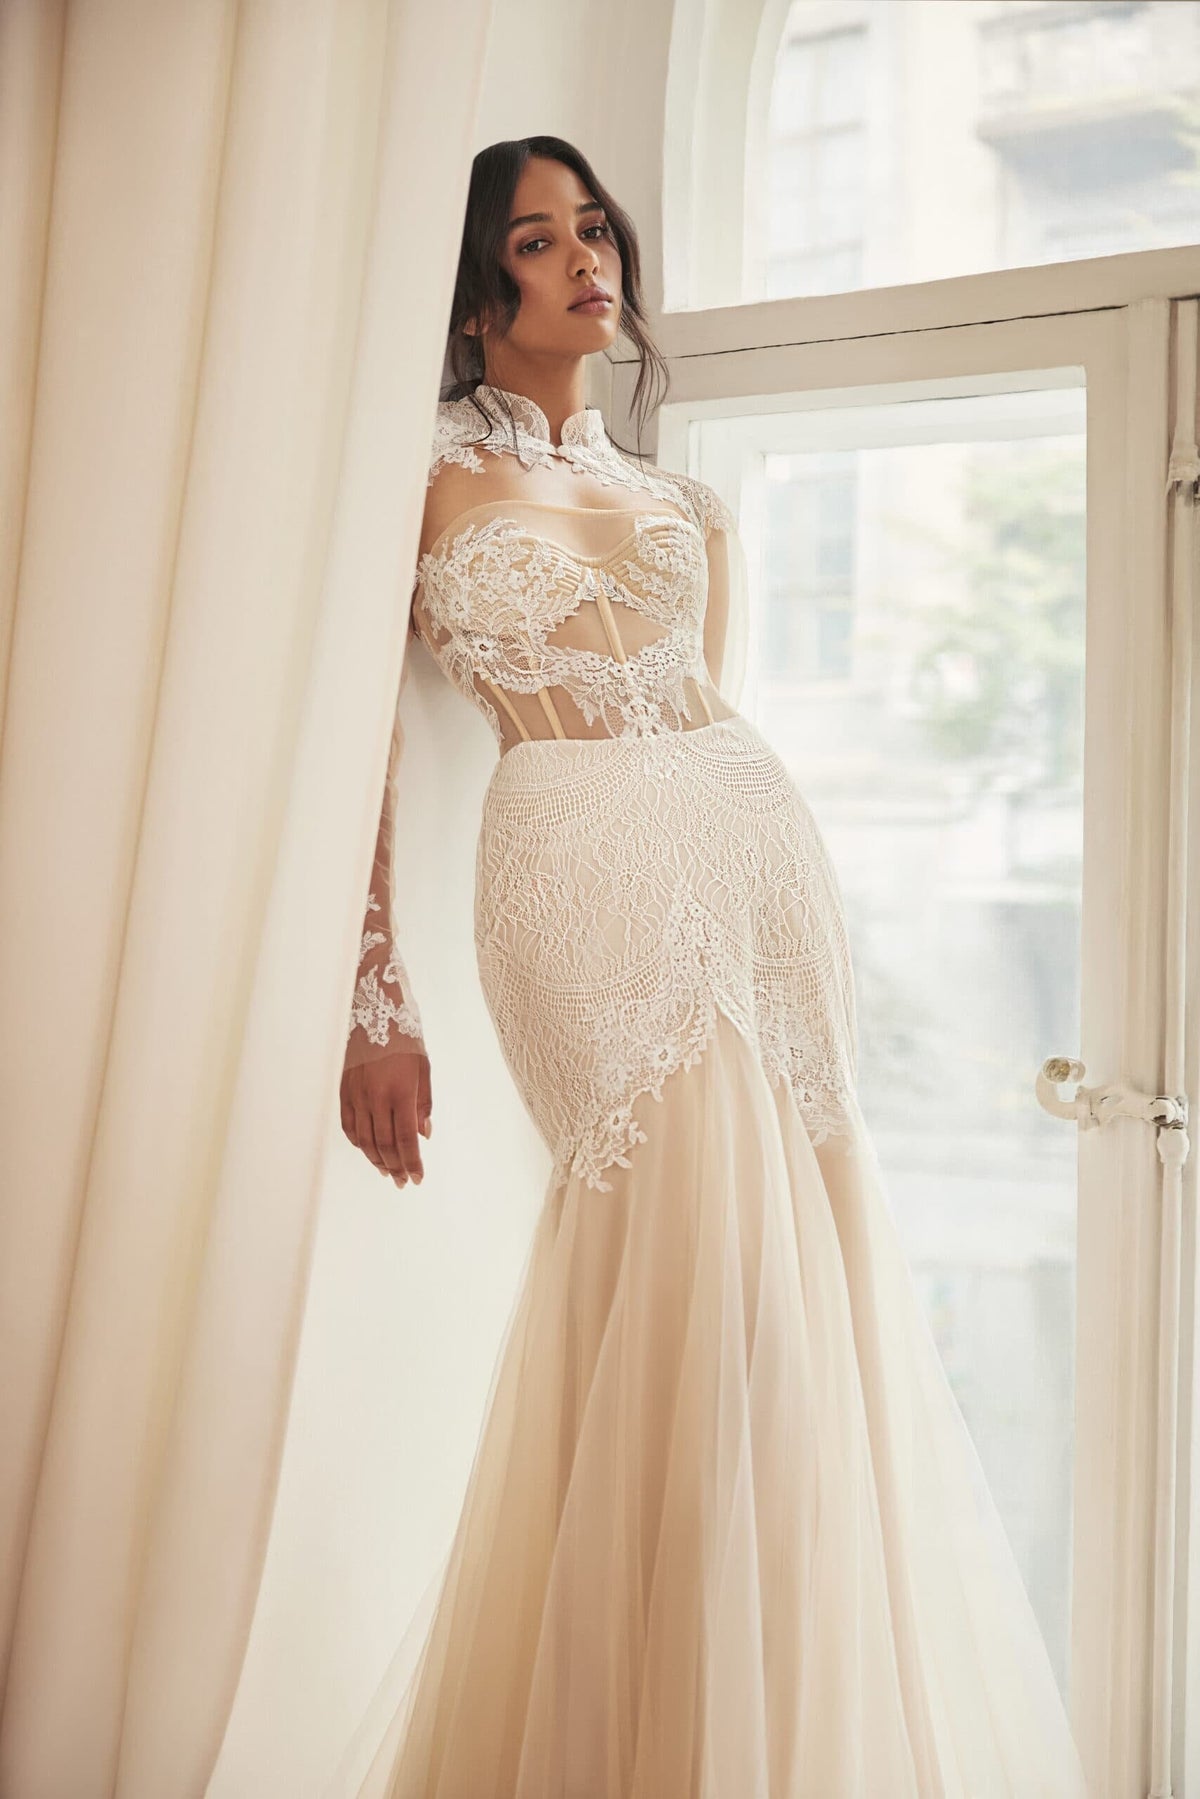 Sexy Fitted Open Back Mermaid Sleeveless Detachable Collar Long Sleeve Sweetheart Neckline Wedding Dress Bridal Gown Lace Corset Back